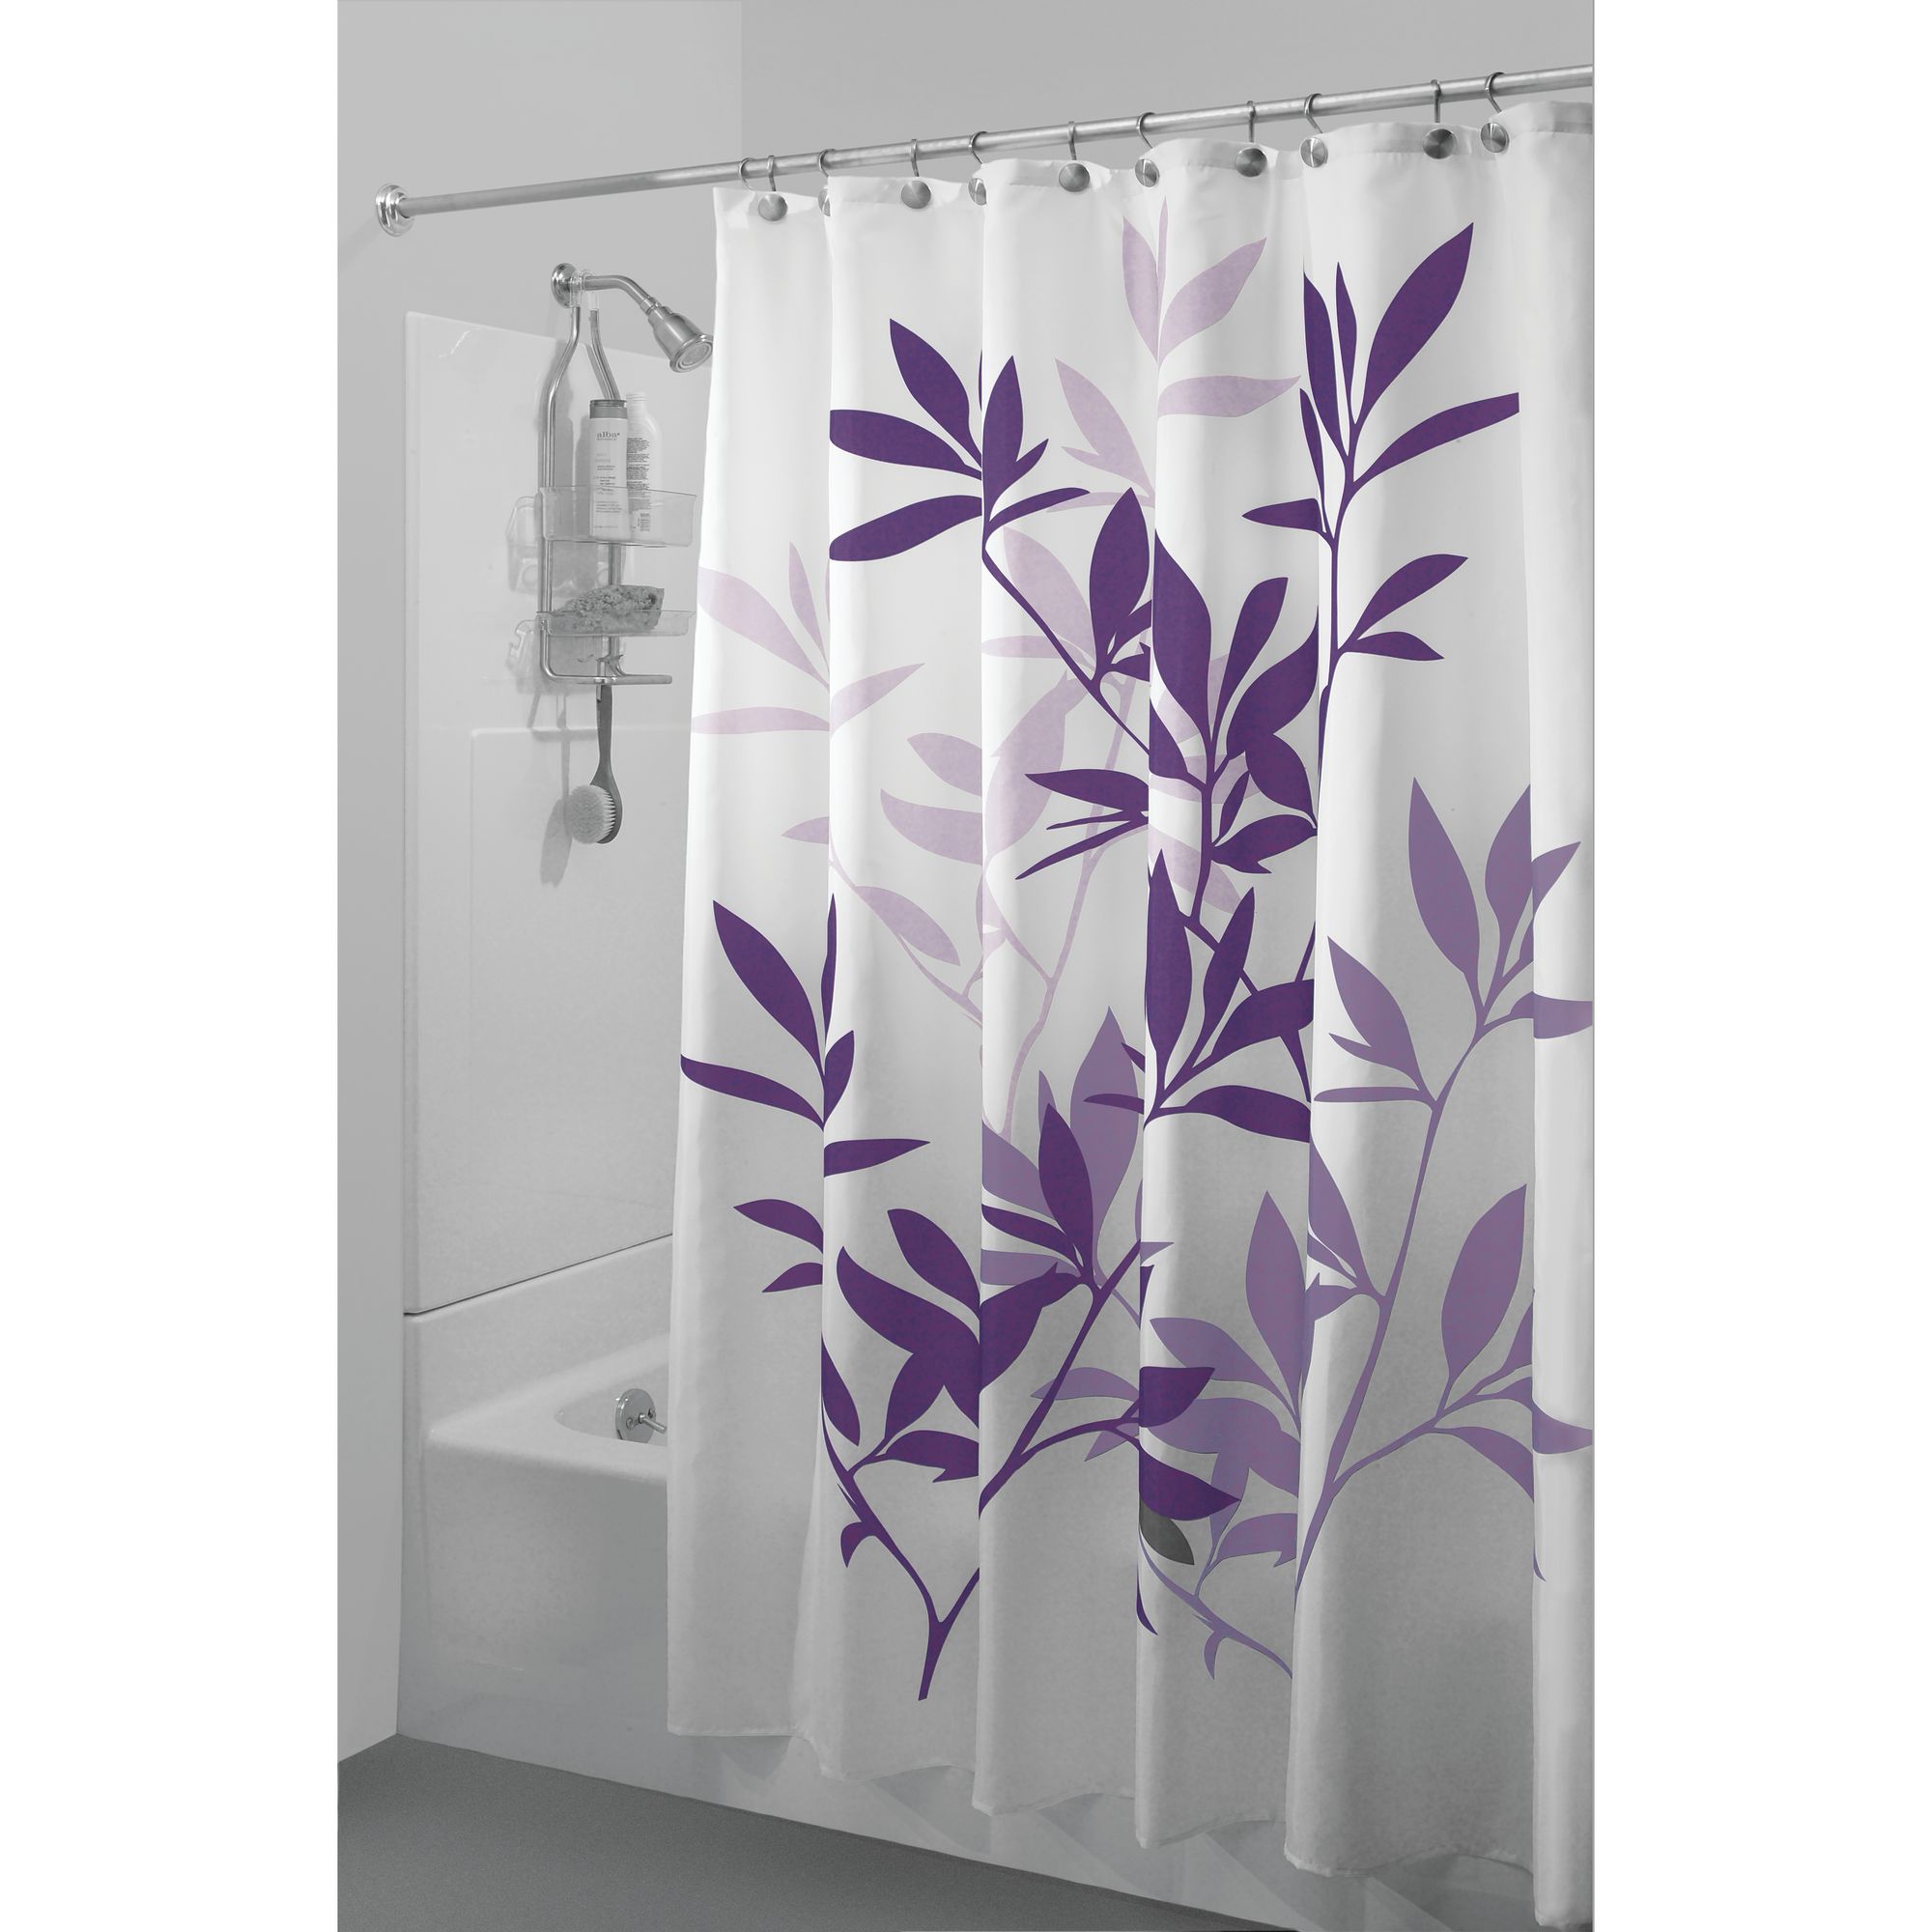 InterDesign Purple Trees Polyester Shower Curtain, 72" x 72" - image 2 of 5